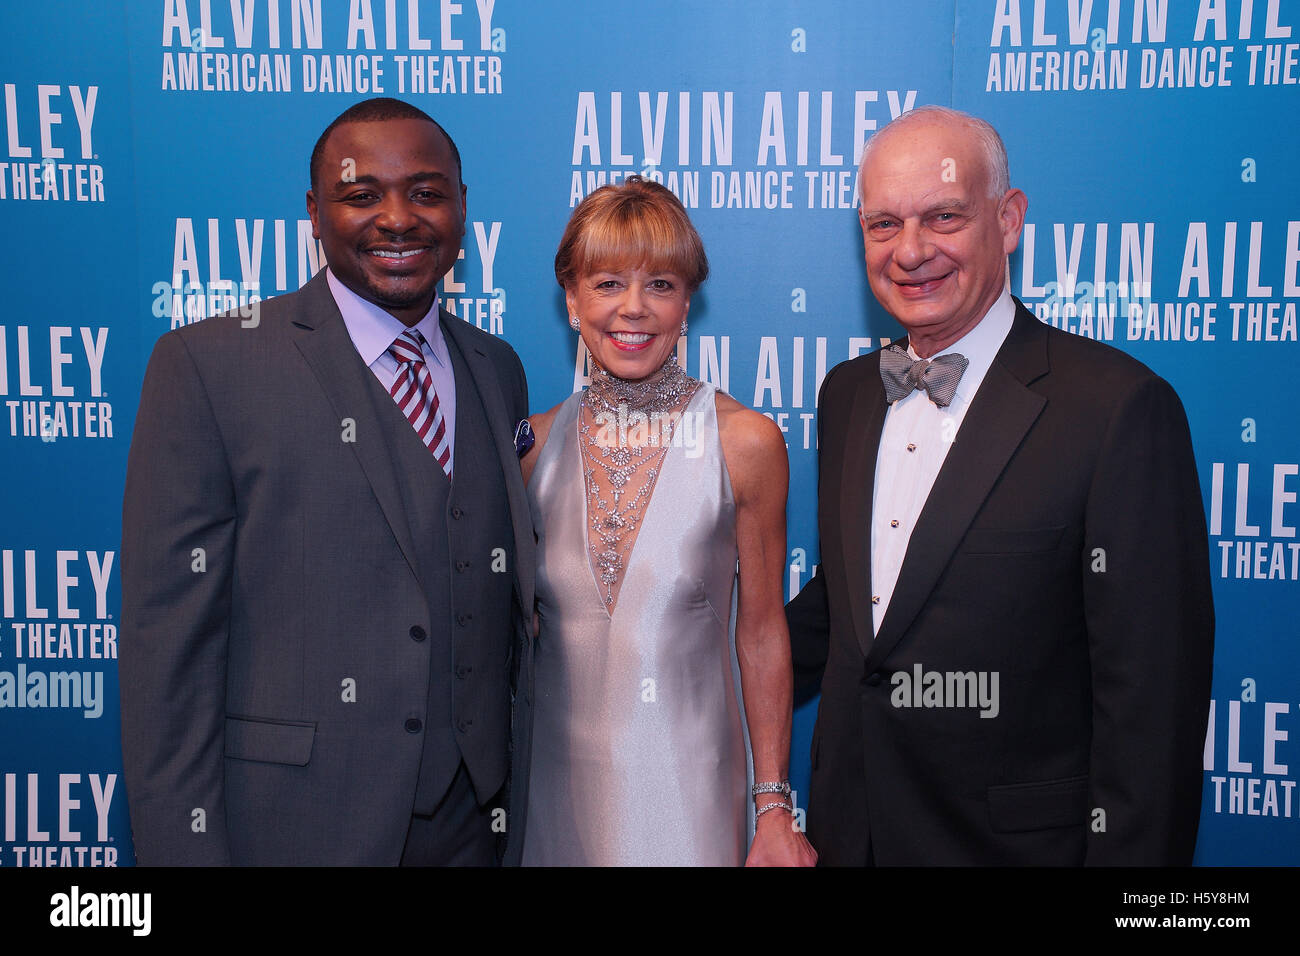 Robert Battle, Daria & Eric J Wallach attend the Red Carpet at the Opening Night Gala Benefit for the 2015/2016 Alvin Ailey American Dance Theater season on December 2, 2015 in New York City. Stock Photo